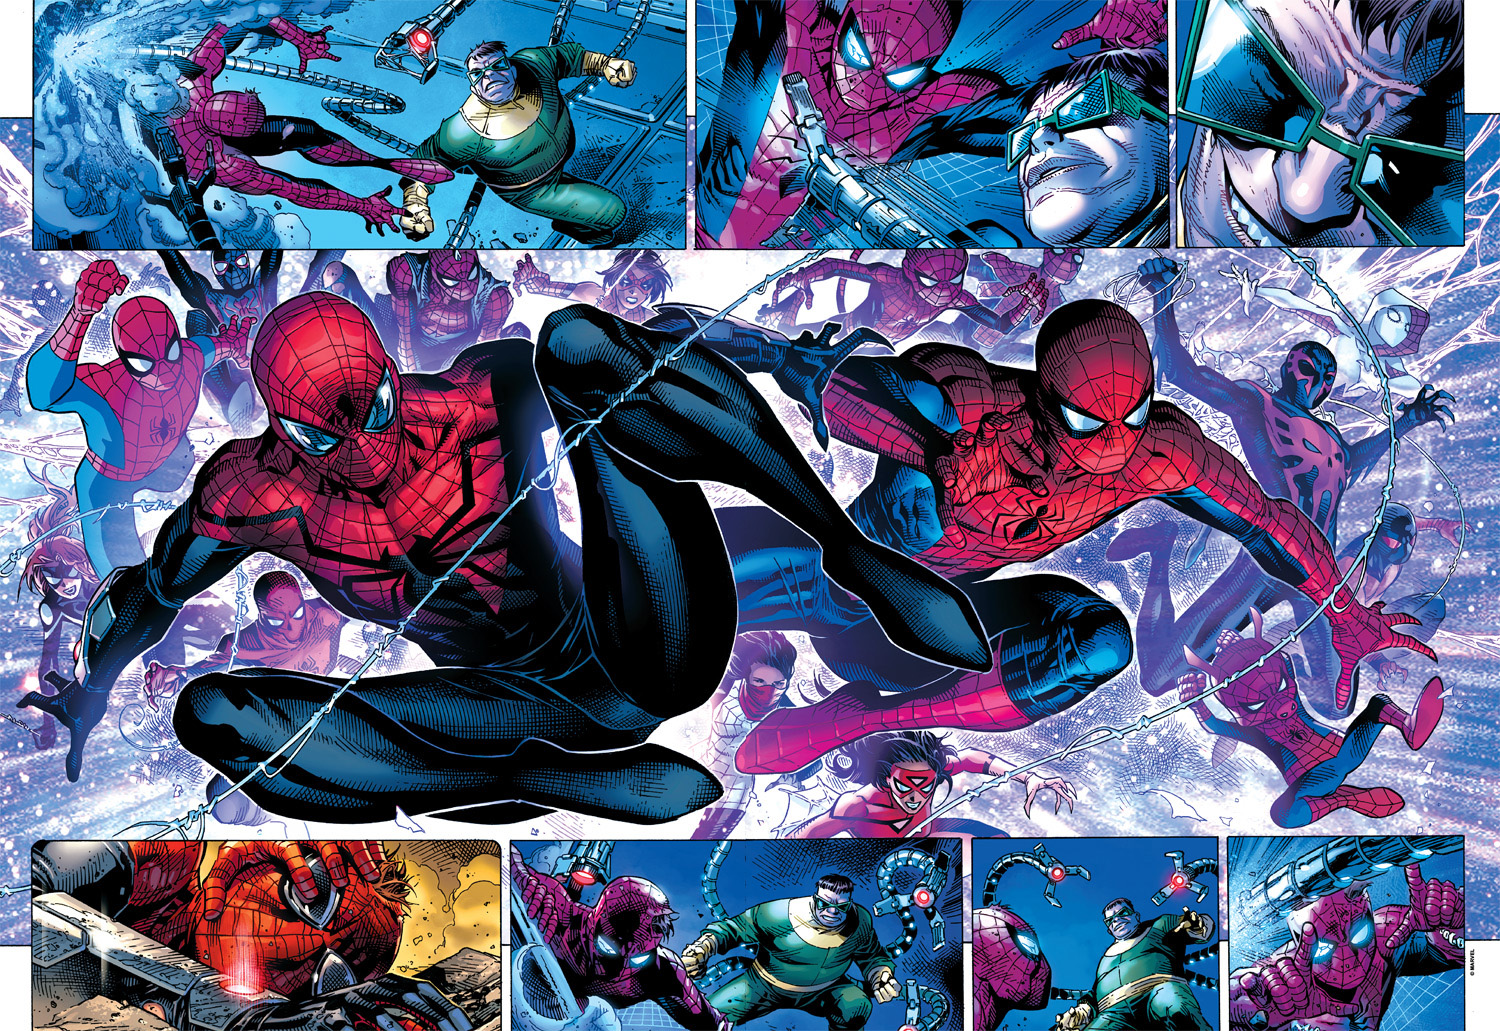 The Clone Conspiracy Movies & TV Jigsaw Puzzle